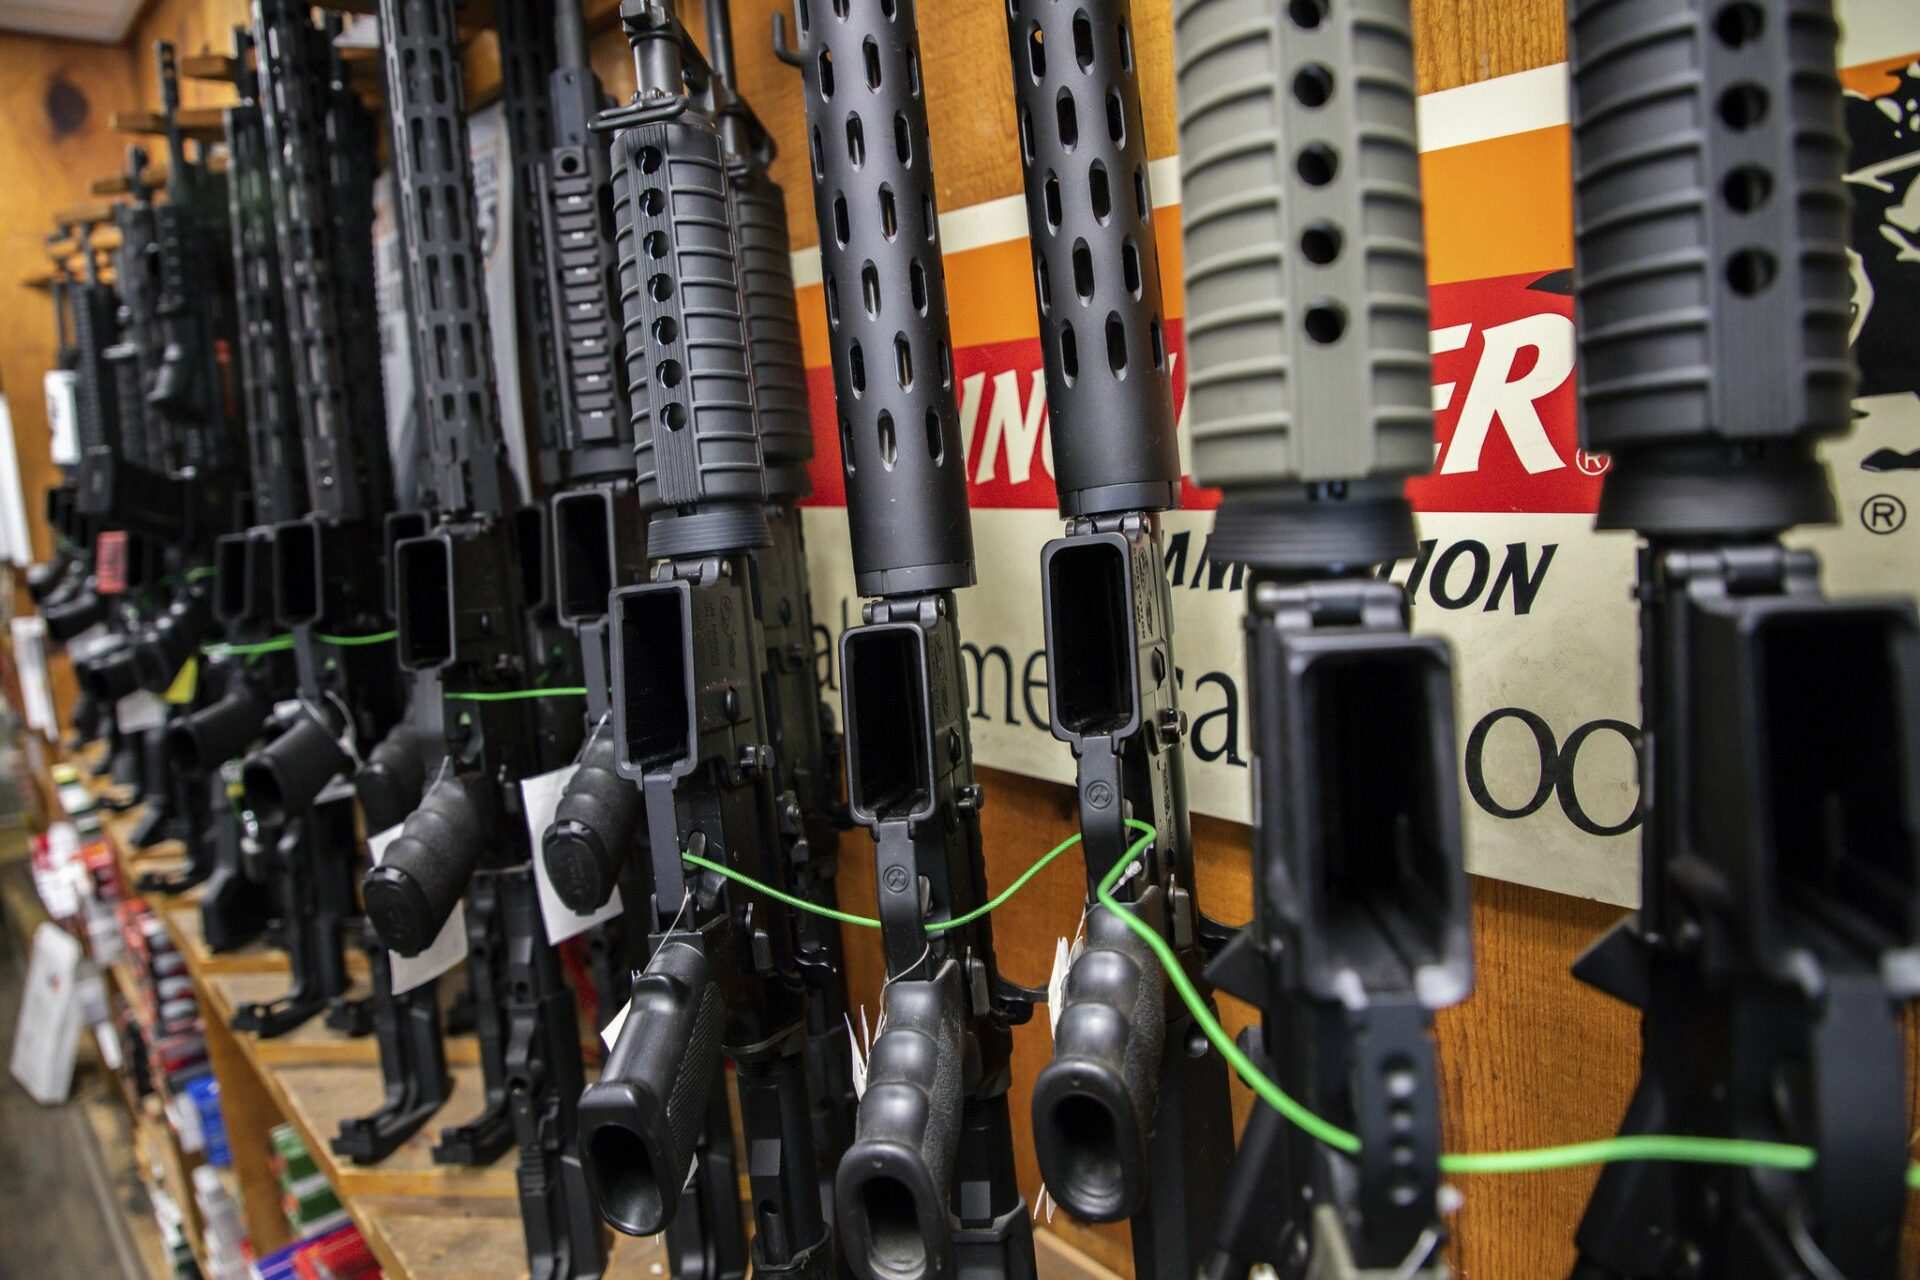 NJ Gun Rights Activists See Opening To Overturn State Gun Laws in SCOTUS Bump Stock Dissent